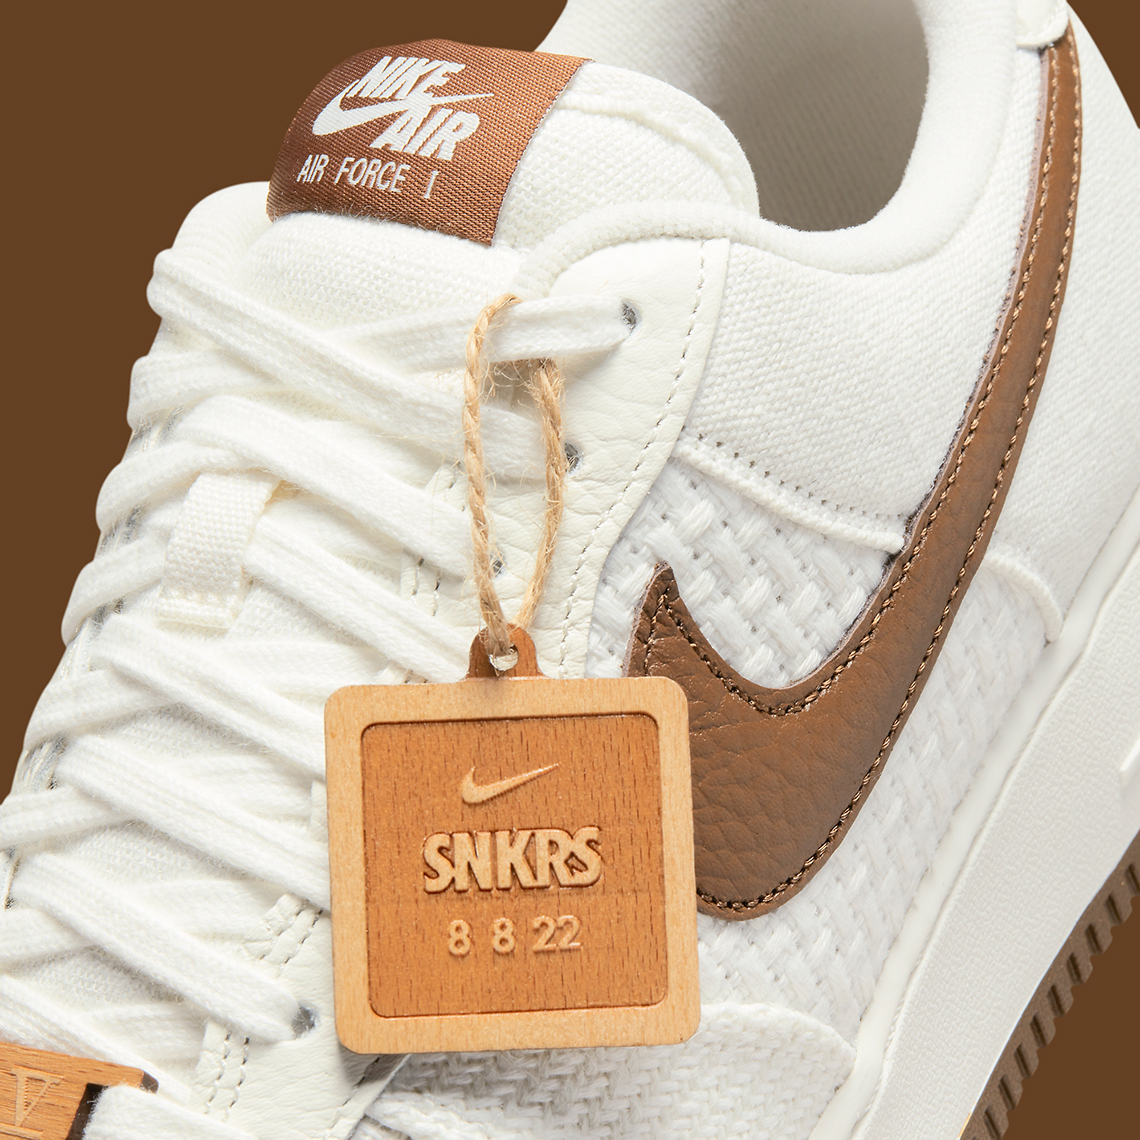 nike air force 1 low snkrs day fifth anniversary 2022 5